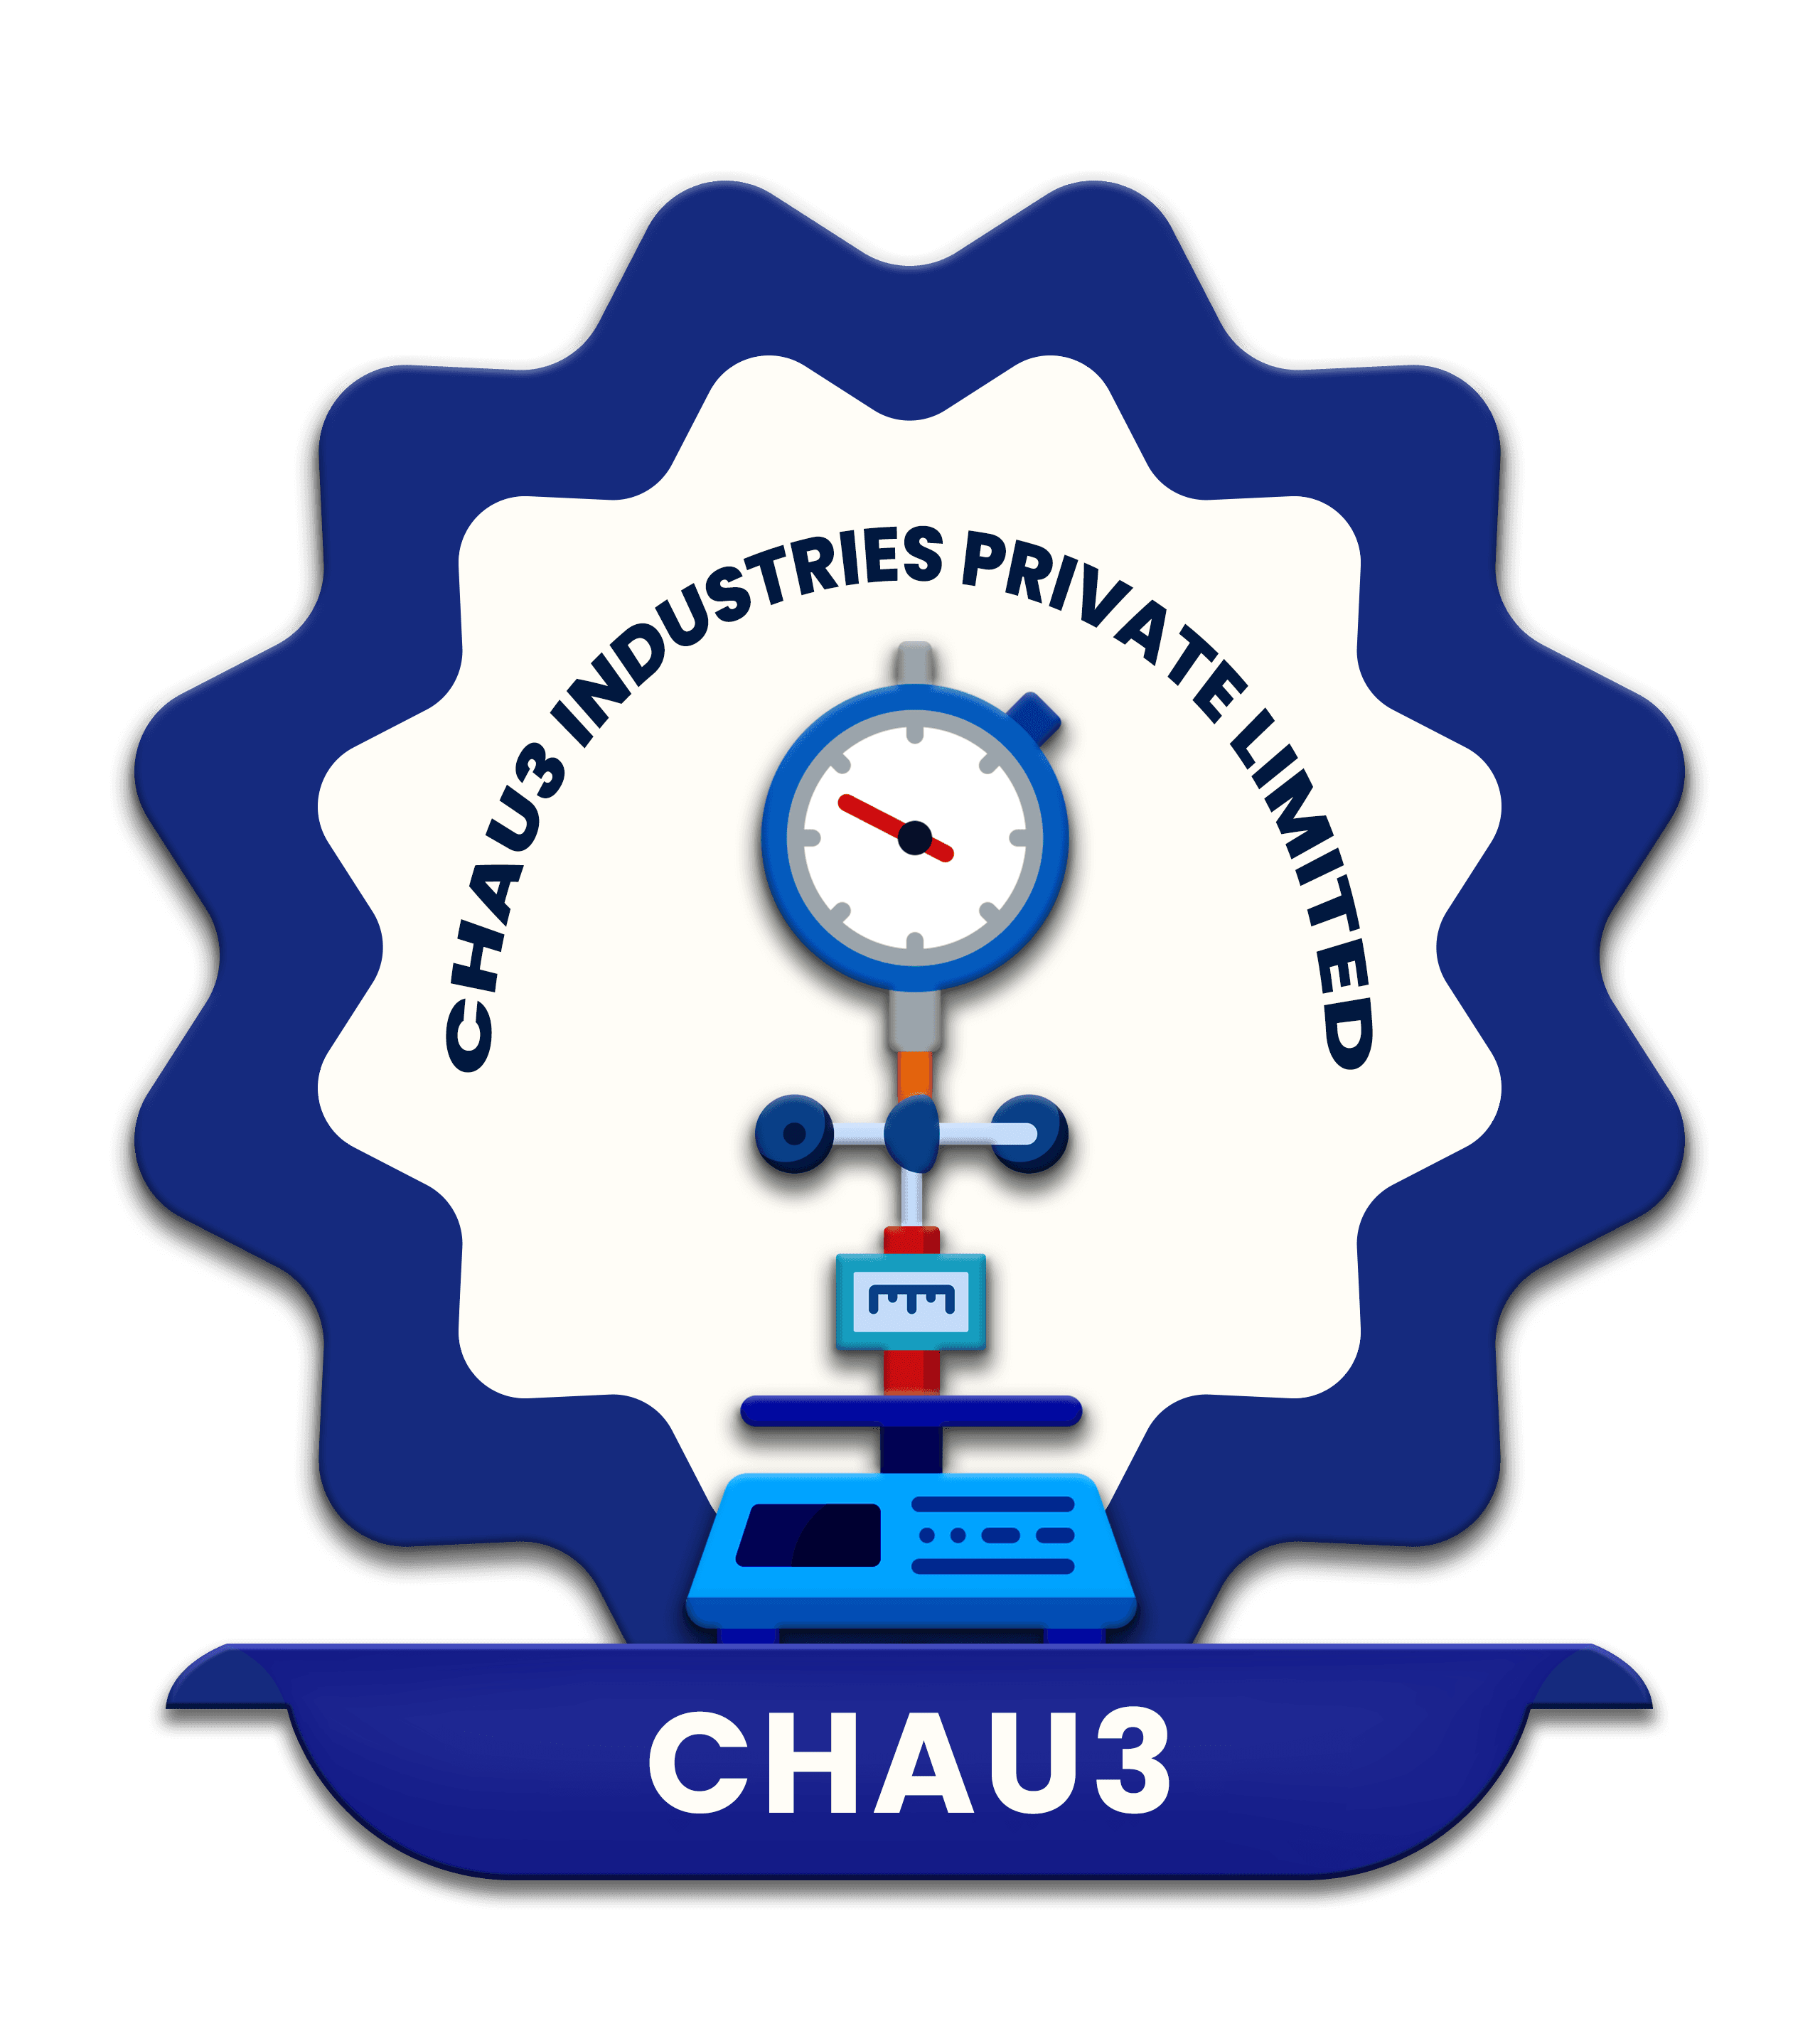 CHAU3 INDUSTRIES PRIVATE LIMITED